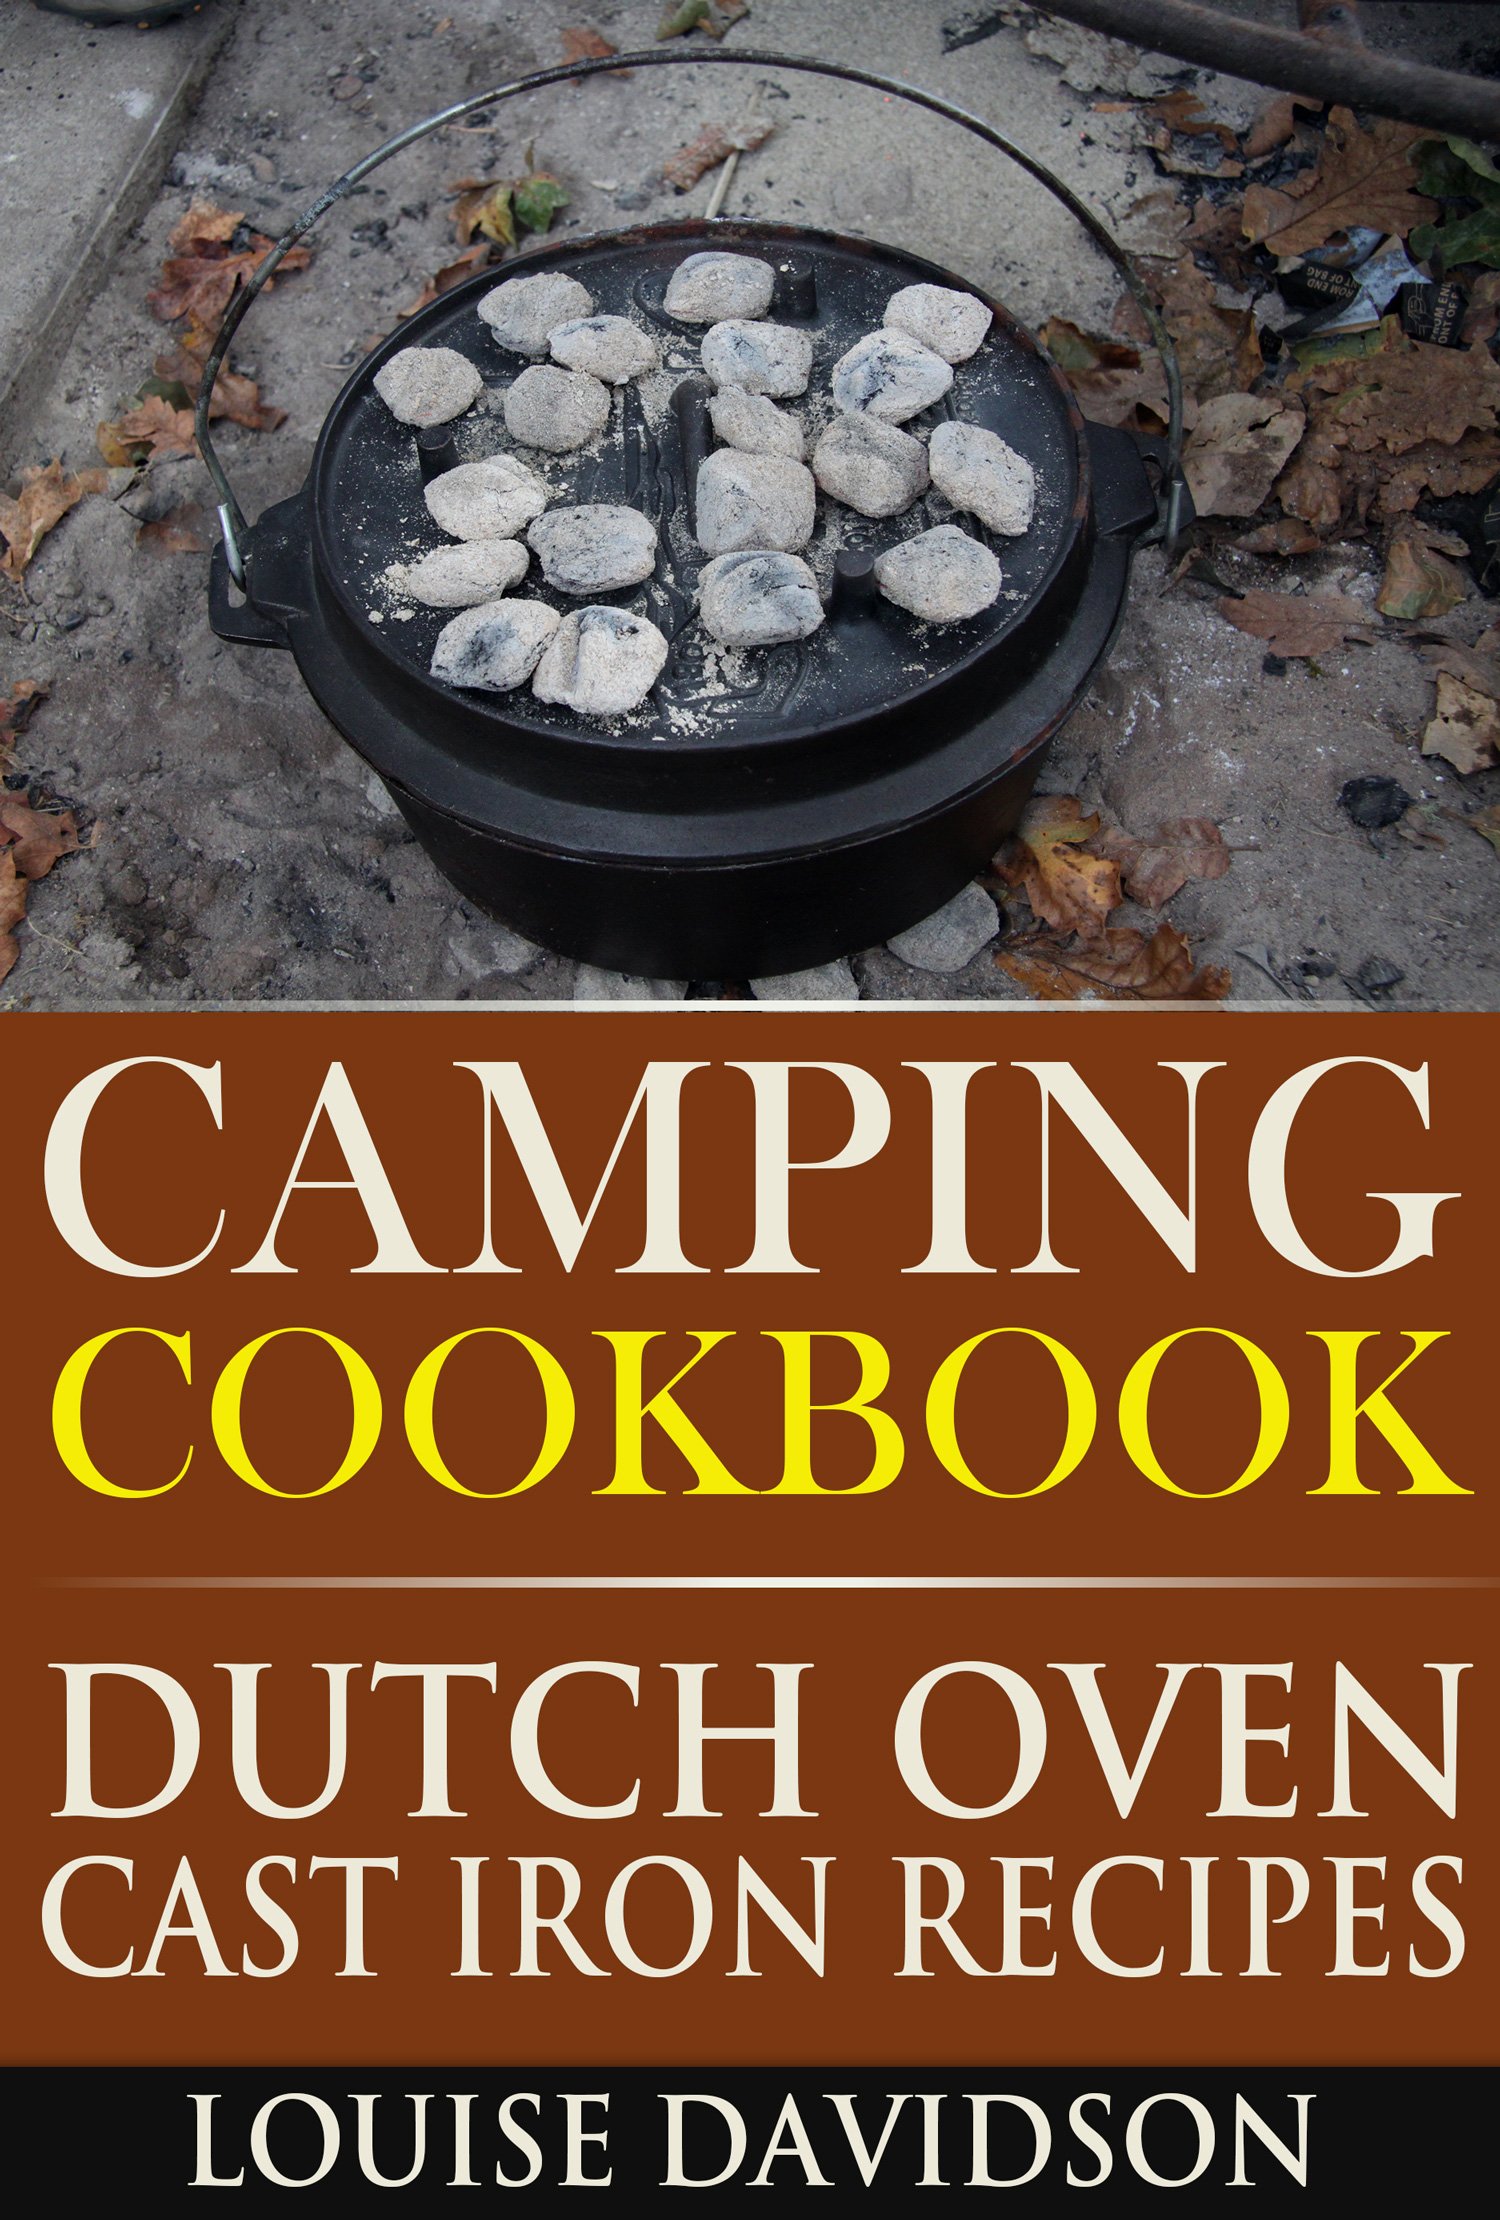 Free Amazon Cookbooks: Foods that Made History, RV, Camping, Tex-Mex, Dumpling, Cast Iron, Indian, Thai, Clean Eating, Freeze, Taco, Sous Vide, Air Fryer, Bread, MORE !!!!